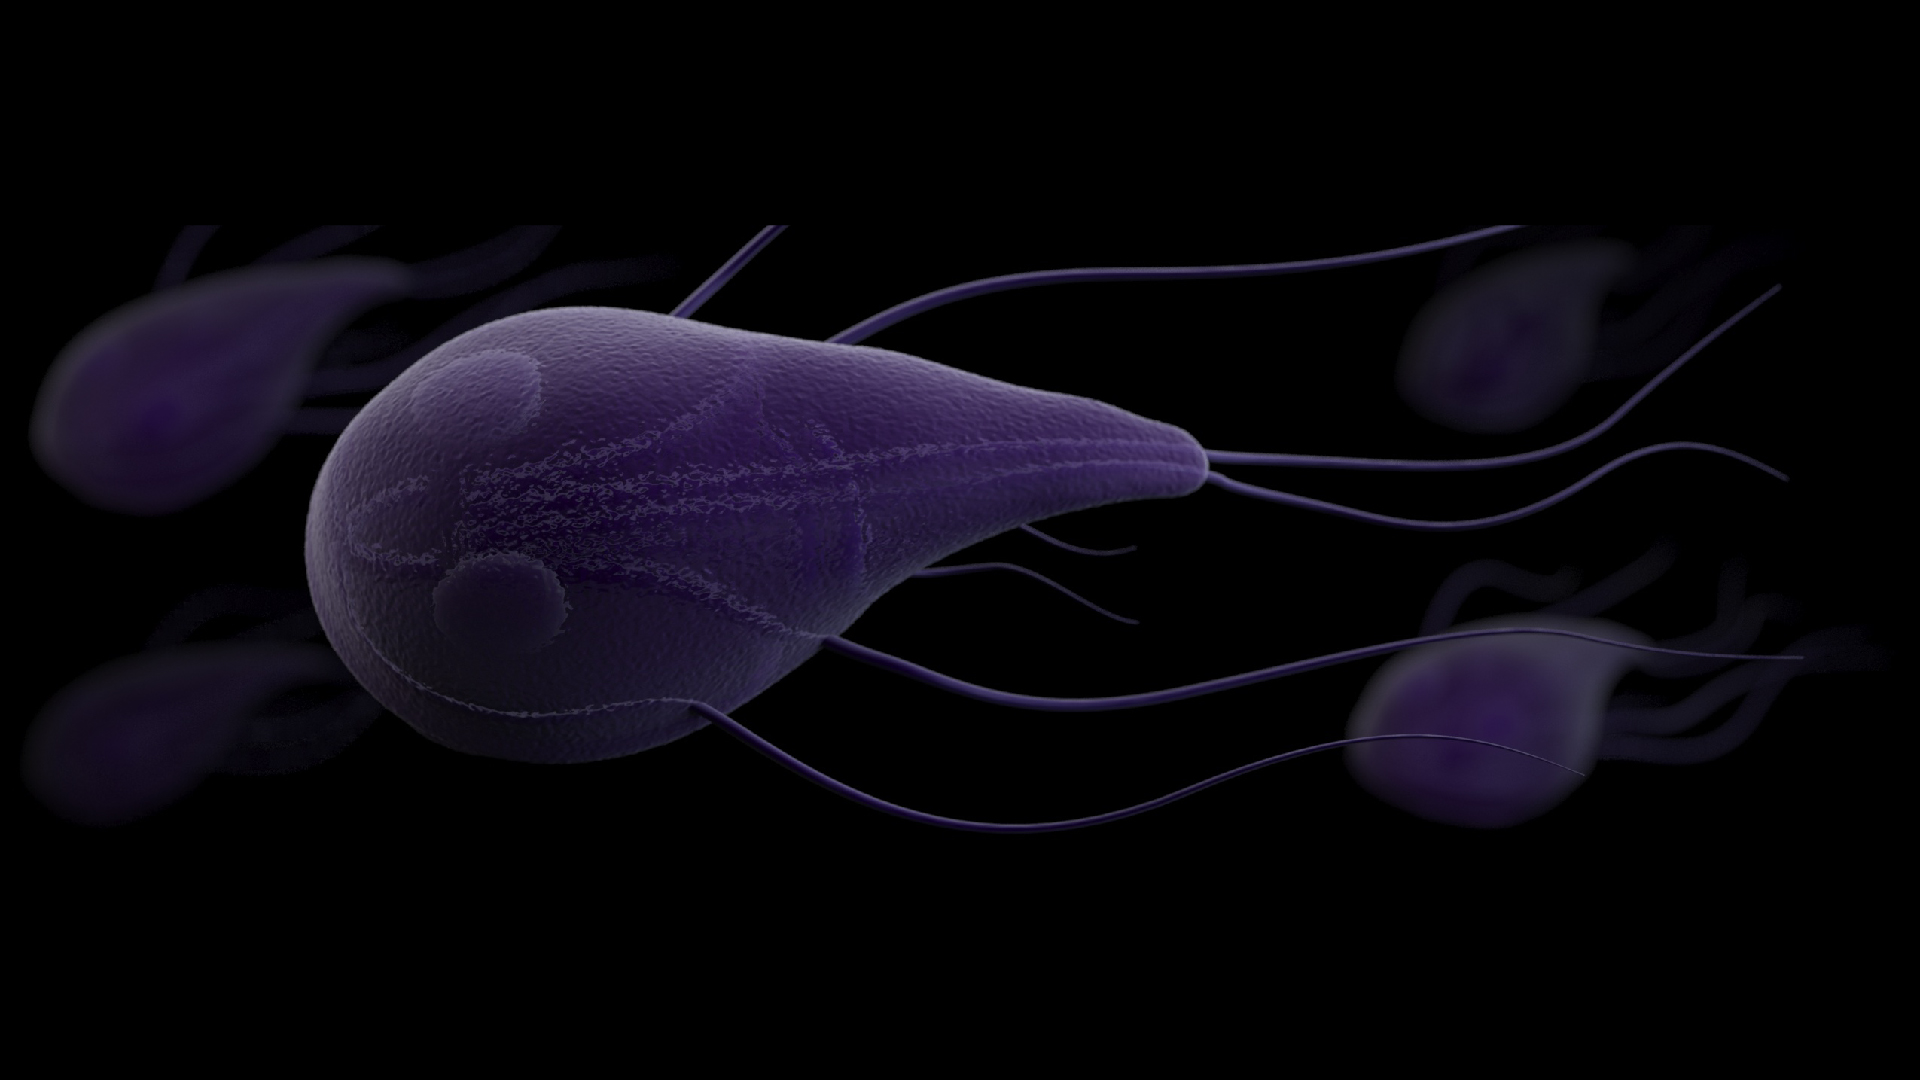 This illustration depicts a three-dimensional (3D), computer-generated image of a grouping of Giardia lamblia parasites.